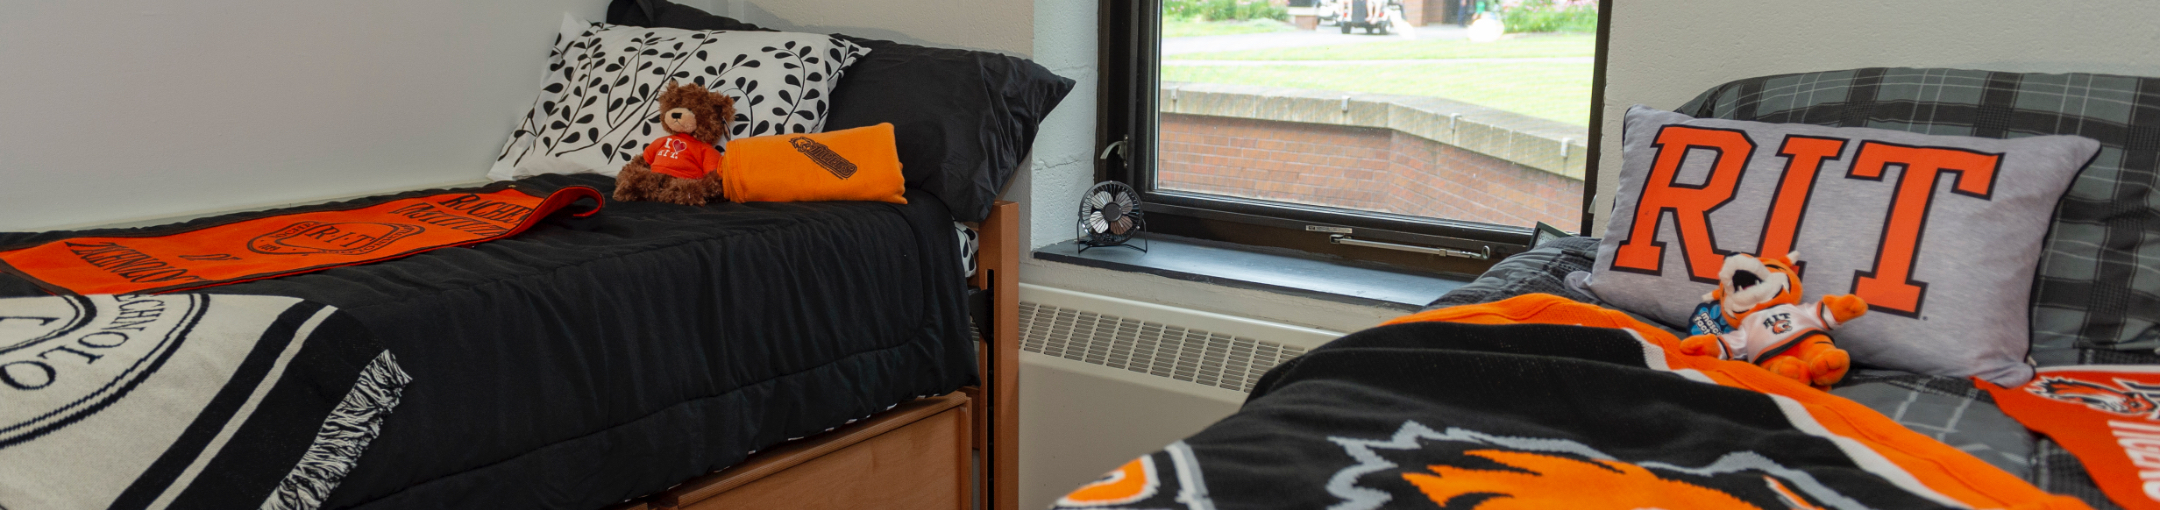 Two beds in a residence hall adorned with RIT apparel 